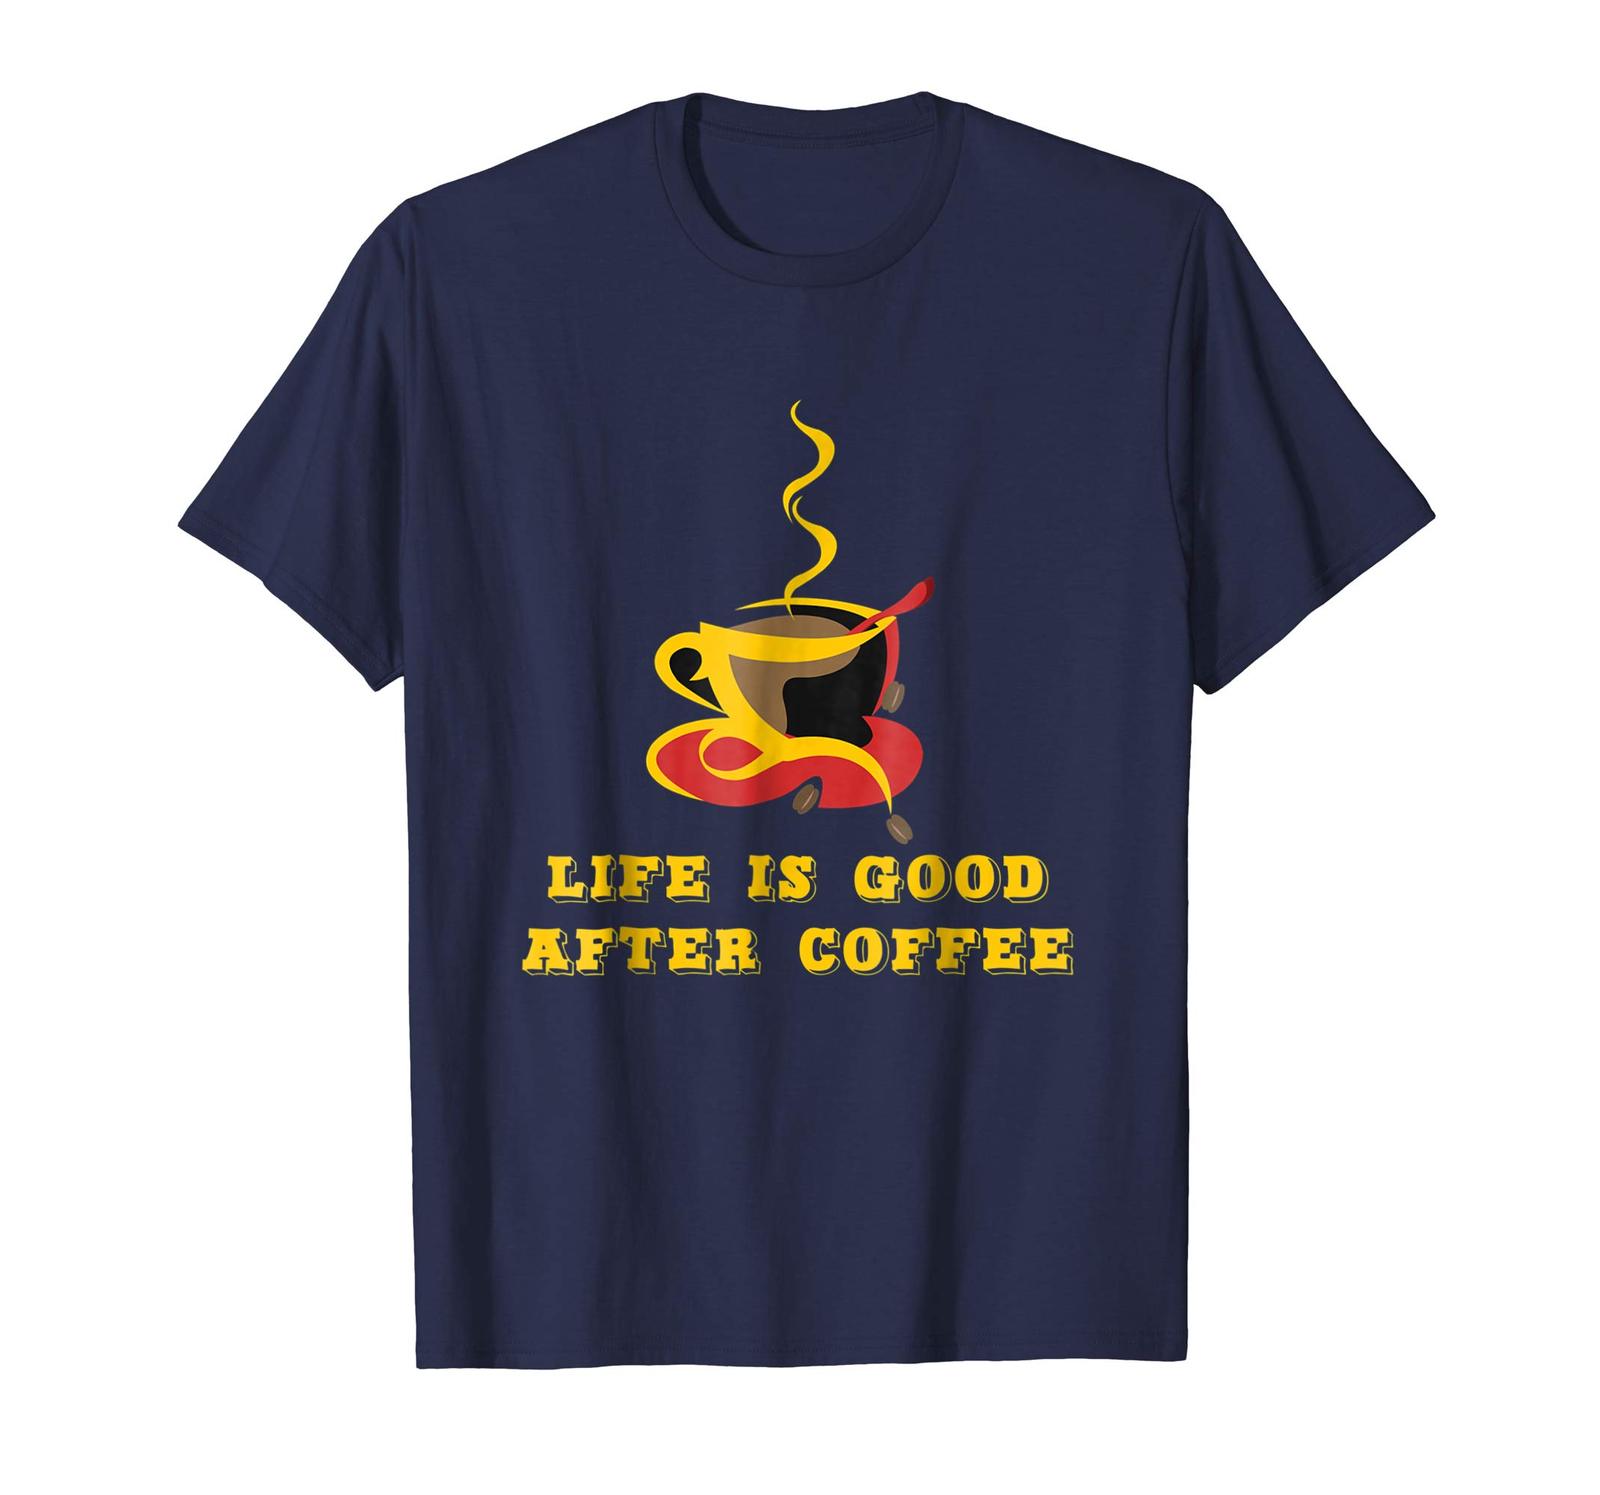 Dog Fashion - Funny Fact Life is Good After Coffee T-Shirt Gift Men Woman Men